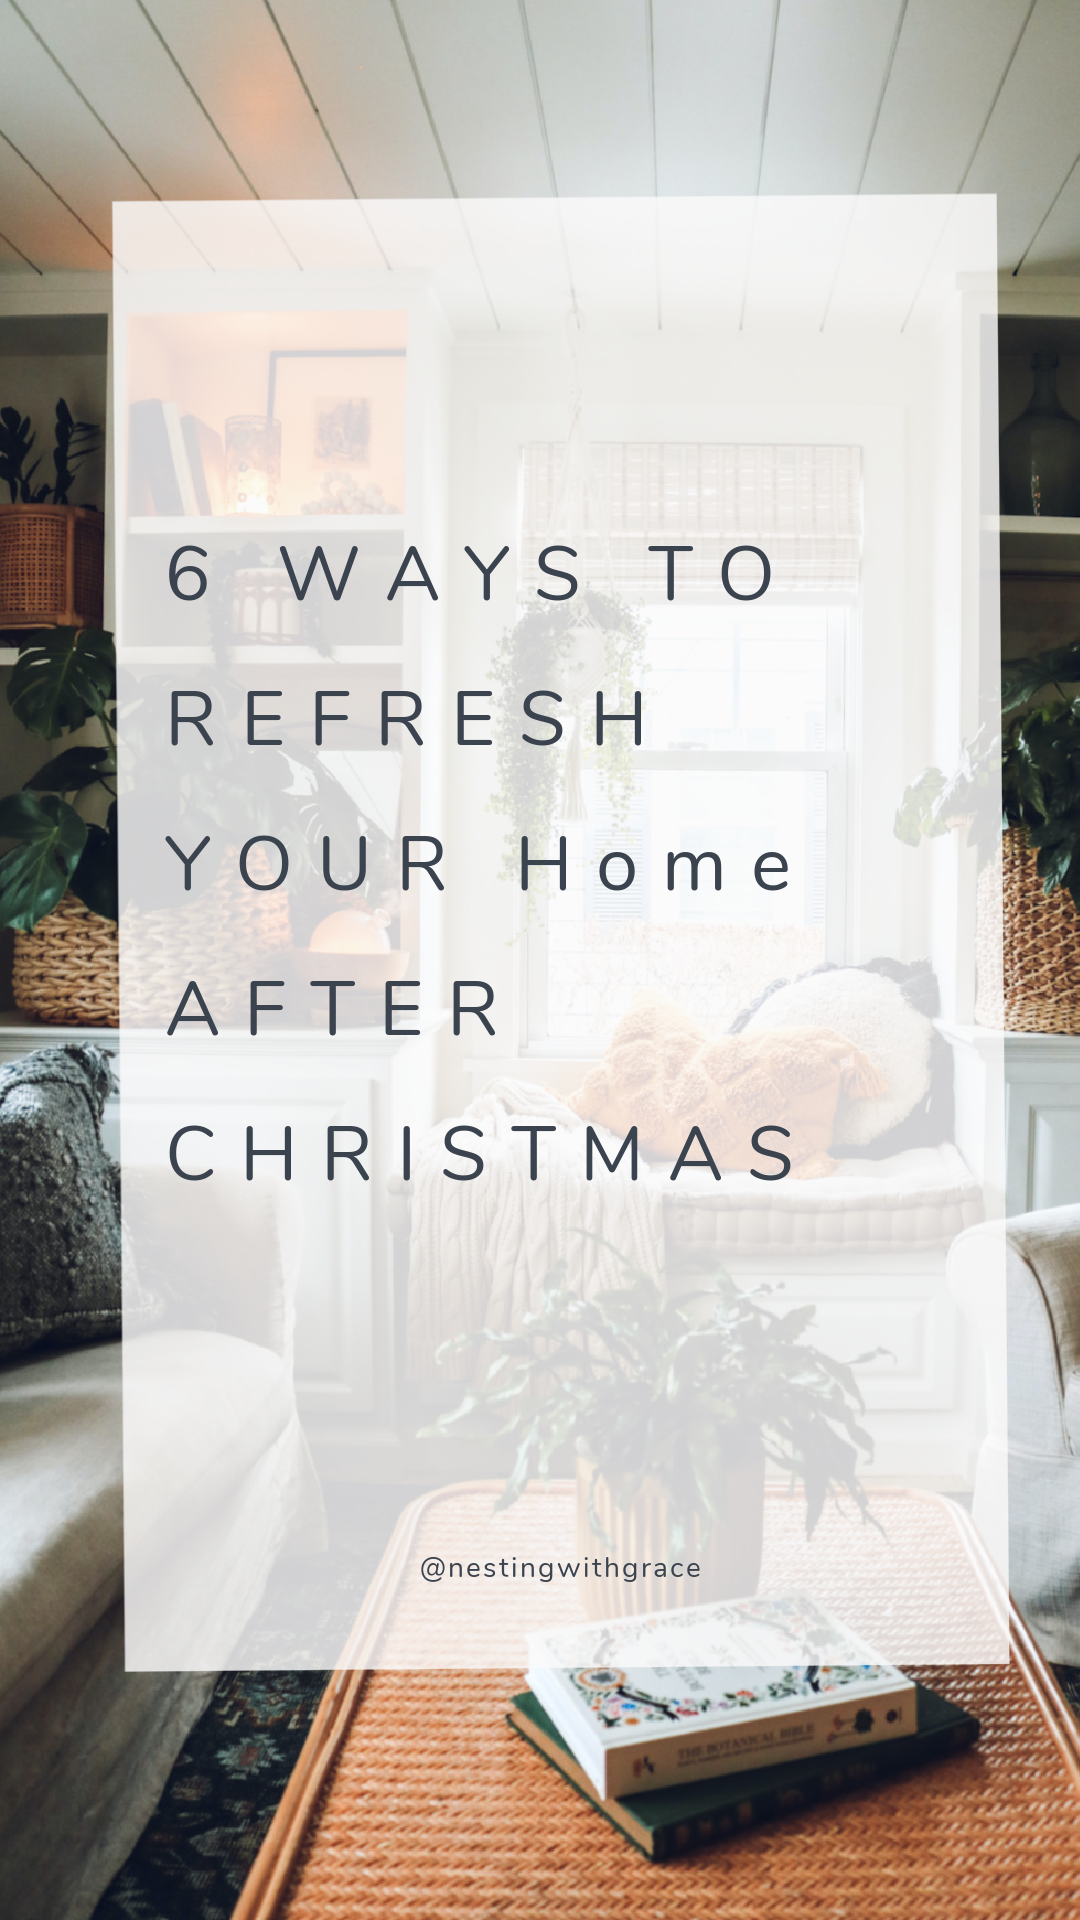 6 Ways to Refresh your Home After Christmas